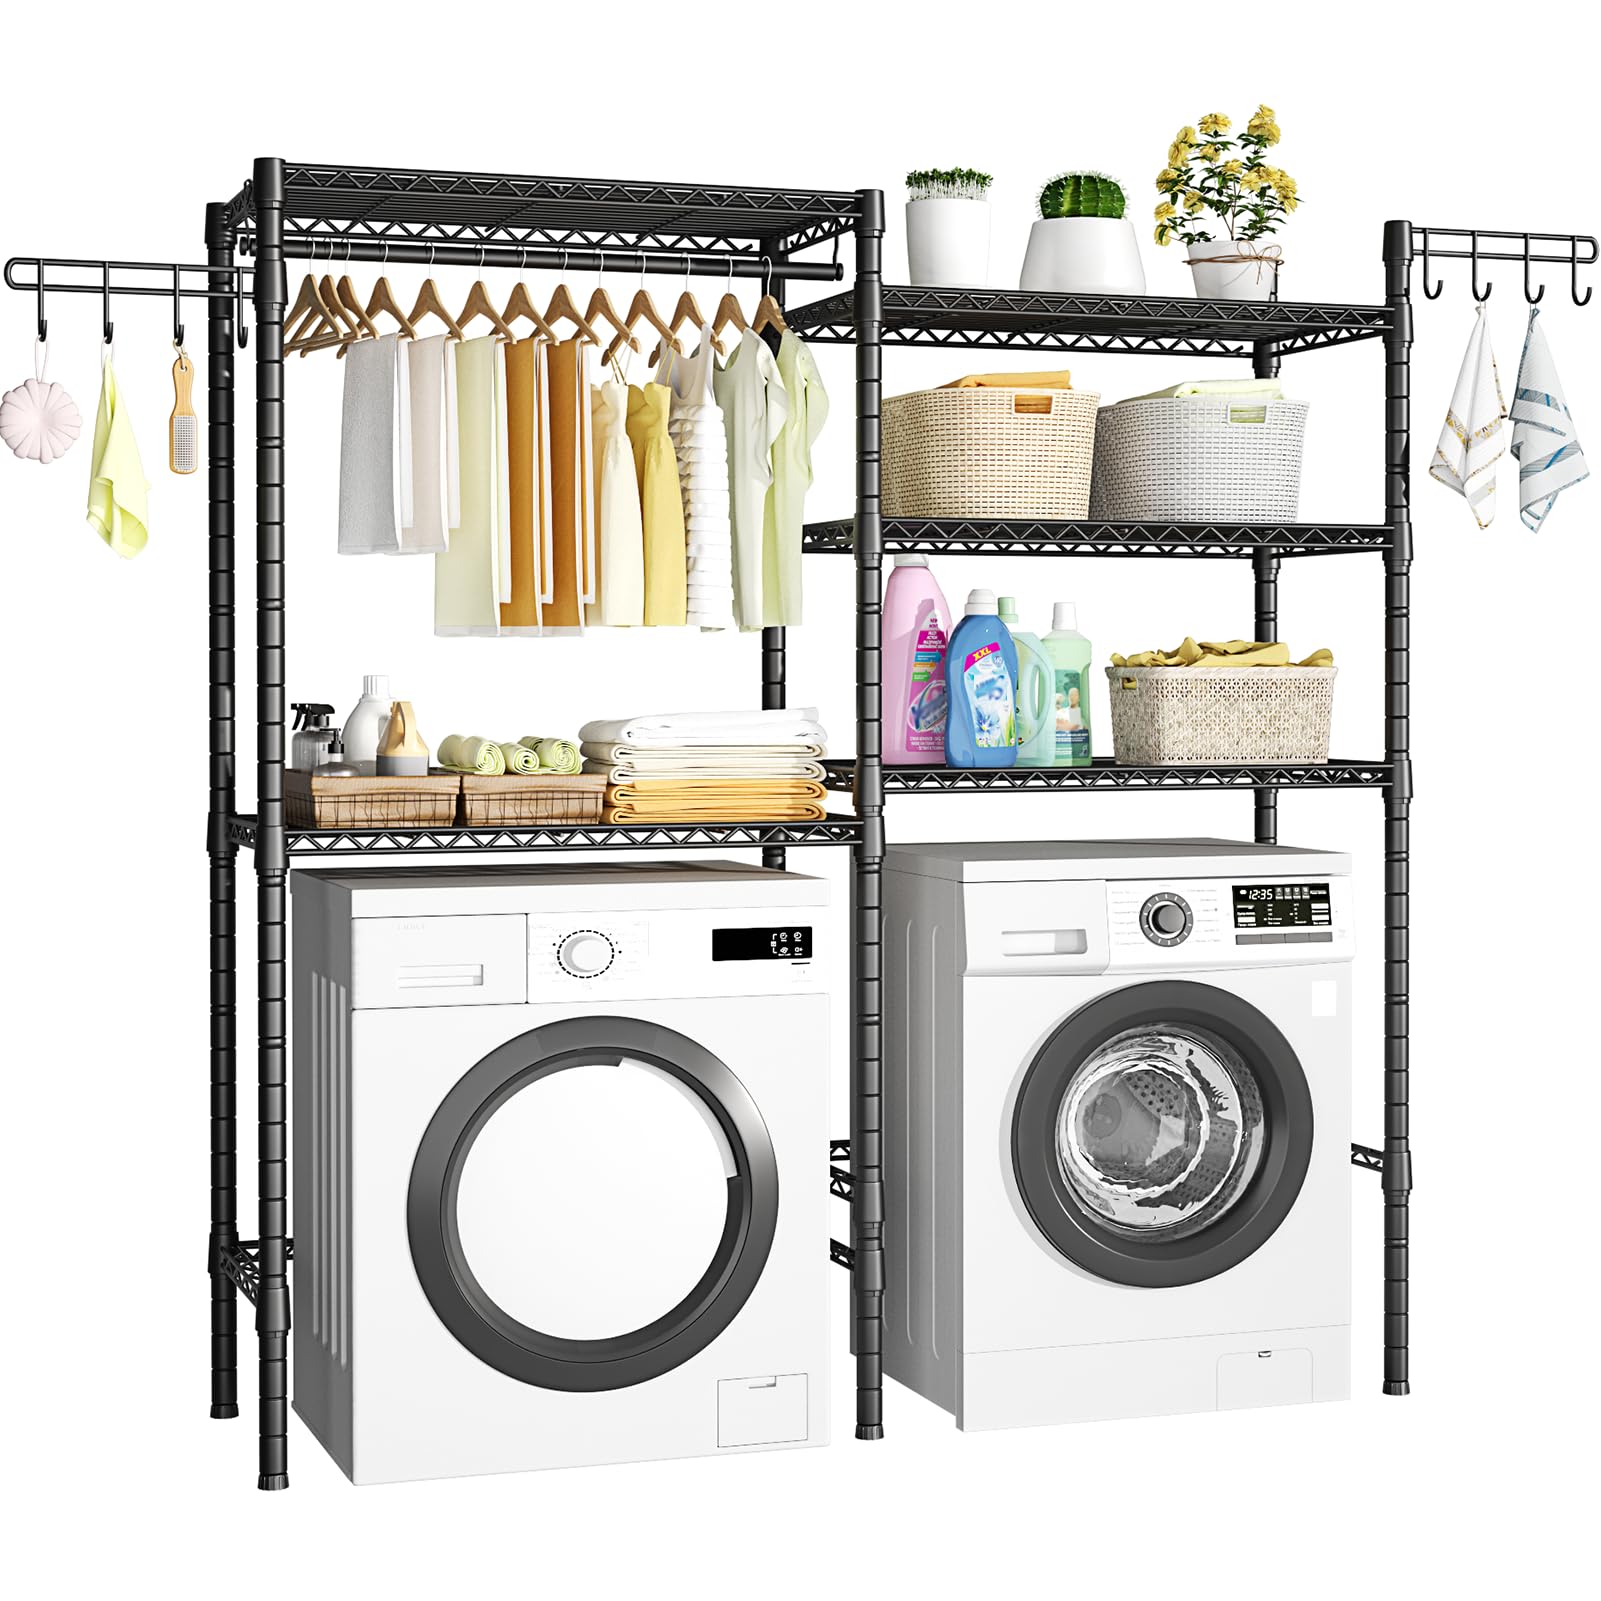 Ulif U5 Over the Washer and Dryer Storage Shelf, Laundry Room Space Saver Bathroom Storage and Organizer Rack for Hanging Towels and Drying Clothes with 5 Wire Shelves, 58.2"W x 13.4"D x 77.5"H, Black